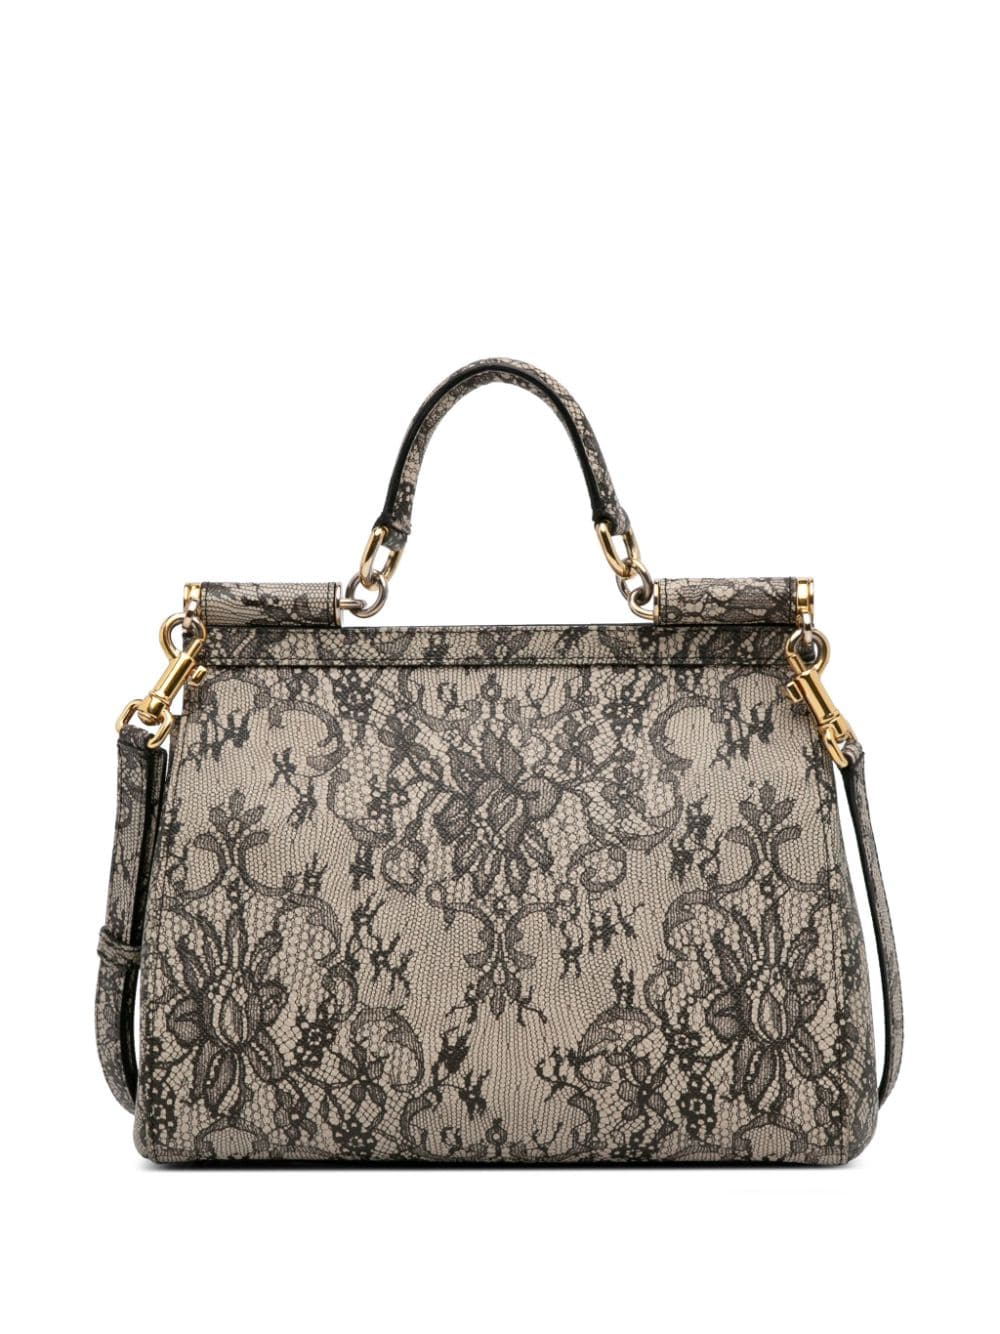 Dolce & Gabbana Pre-Owned 21th Century Lace Printed Miss Sicily satchel - Bruin